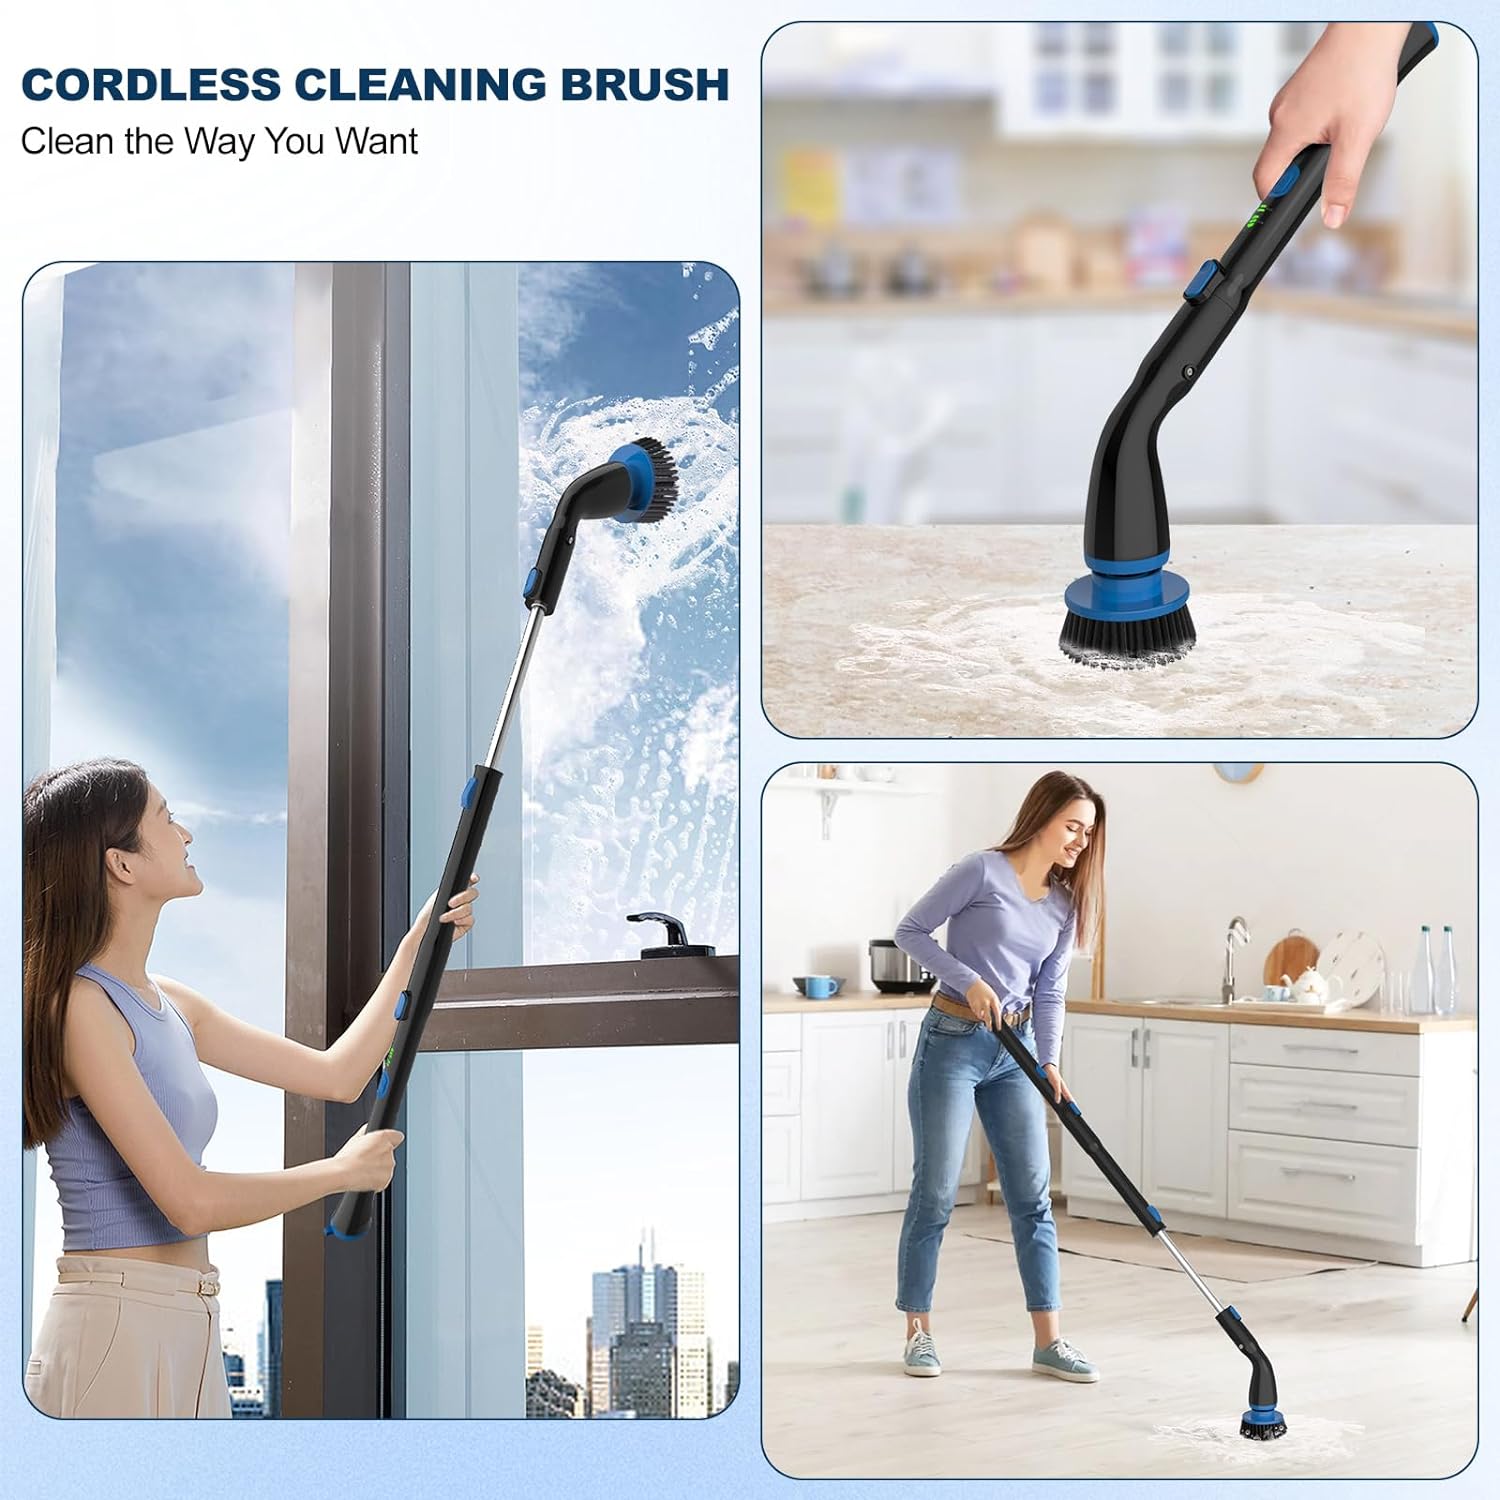 Electric Cordless Spin Cleaning Brush Scrubber 4 Replaceable Brush Heads Shower Bathroom Kitchen Tub Tile Floor-Brush Scrubbers-LifeGetsEasy